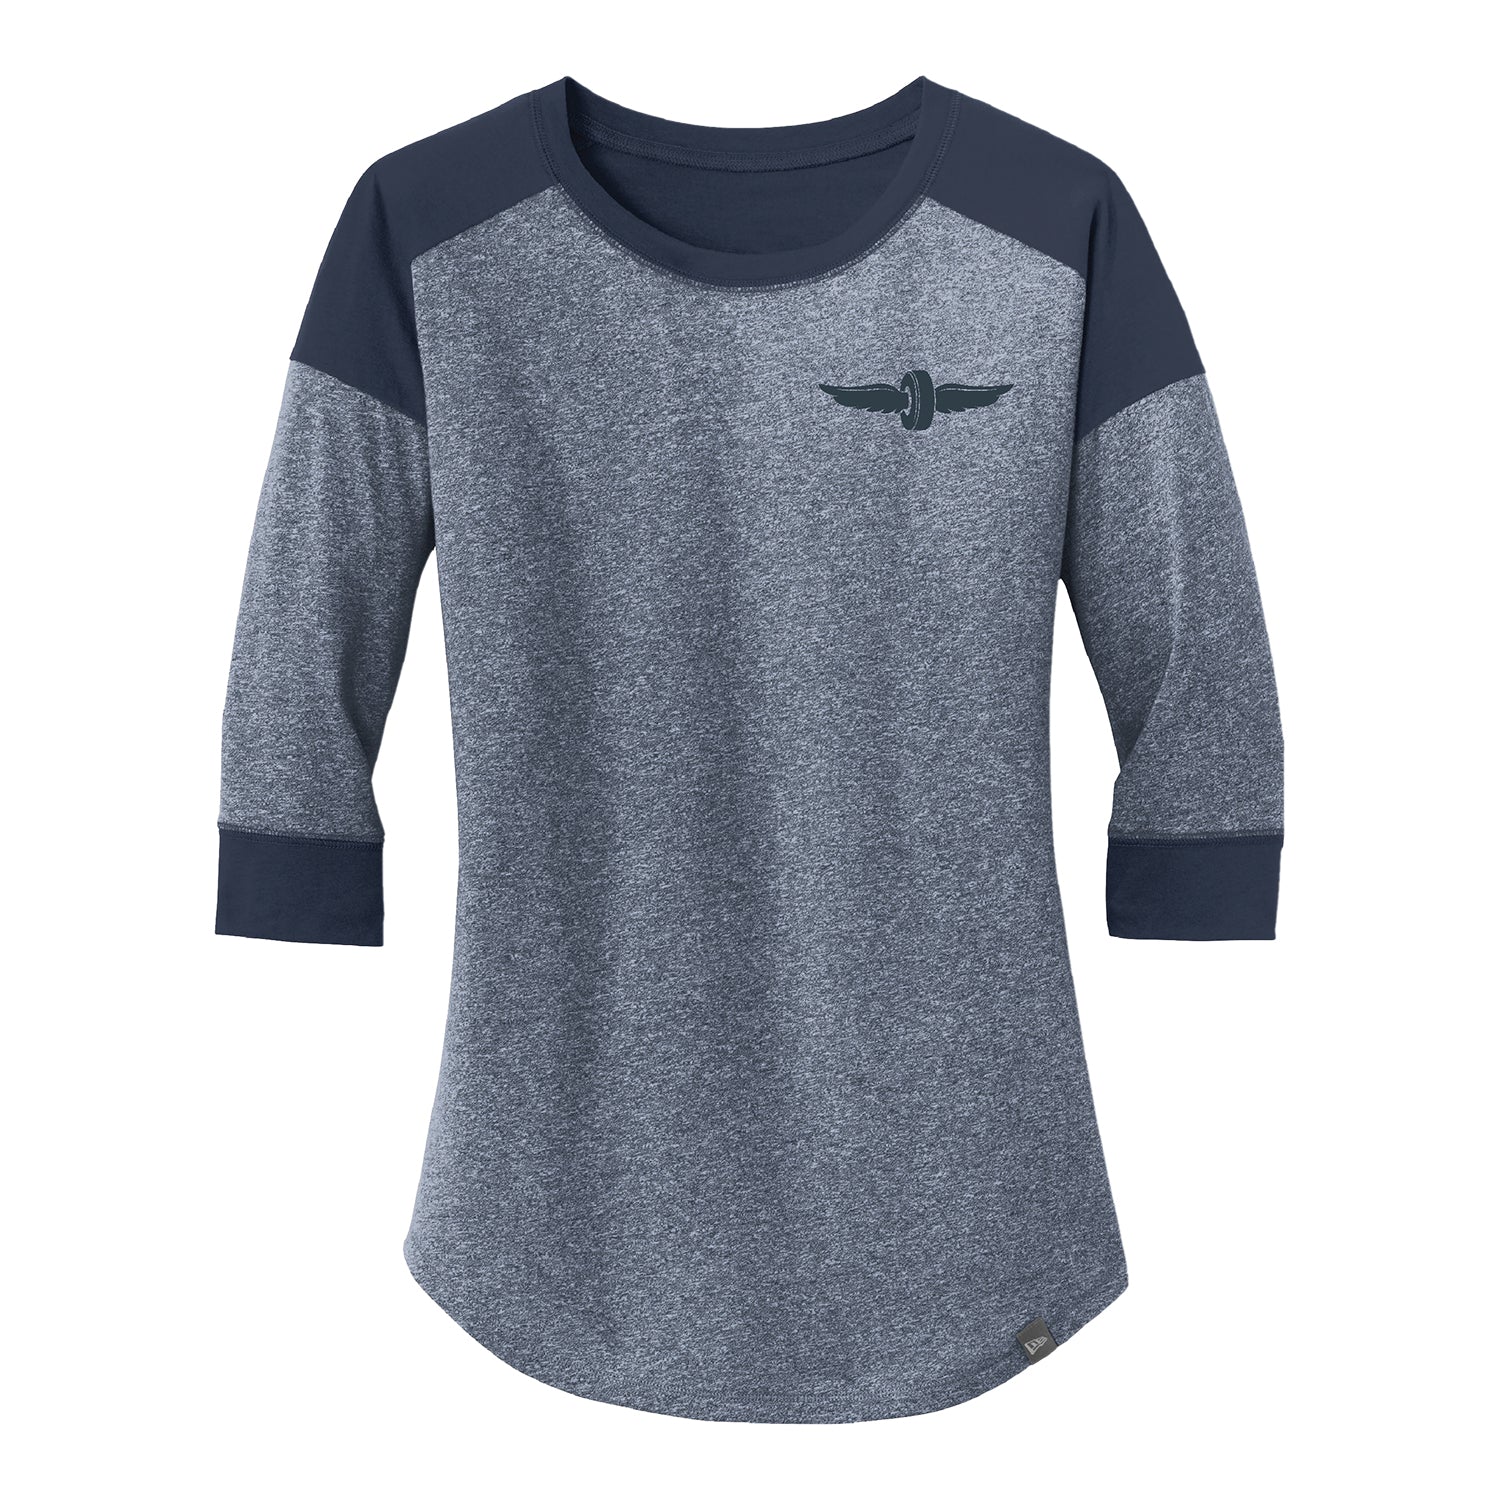 veltalende antage rulletrappe Wing and Wheel 3/4 Sleeve T-Shirt